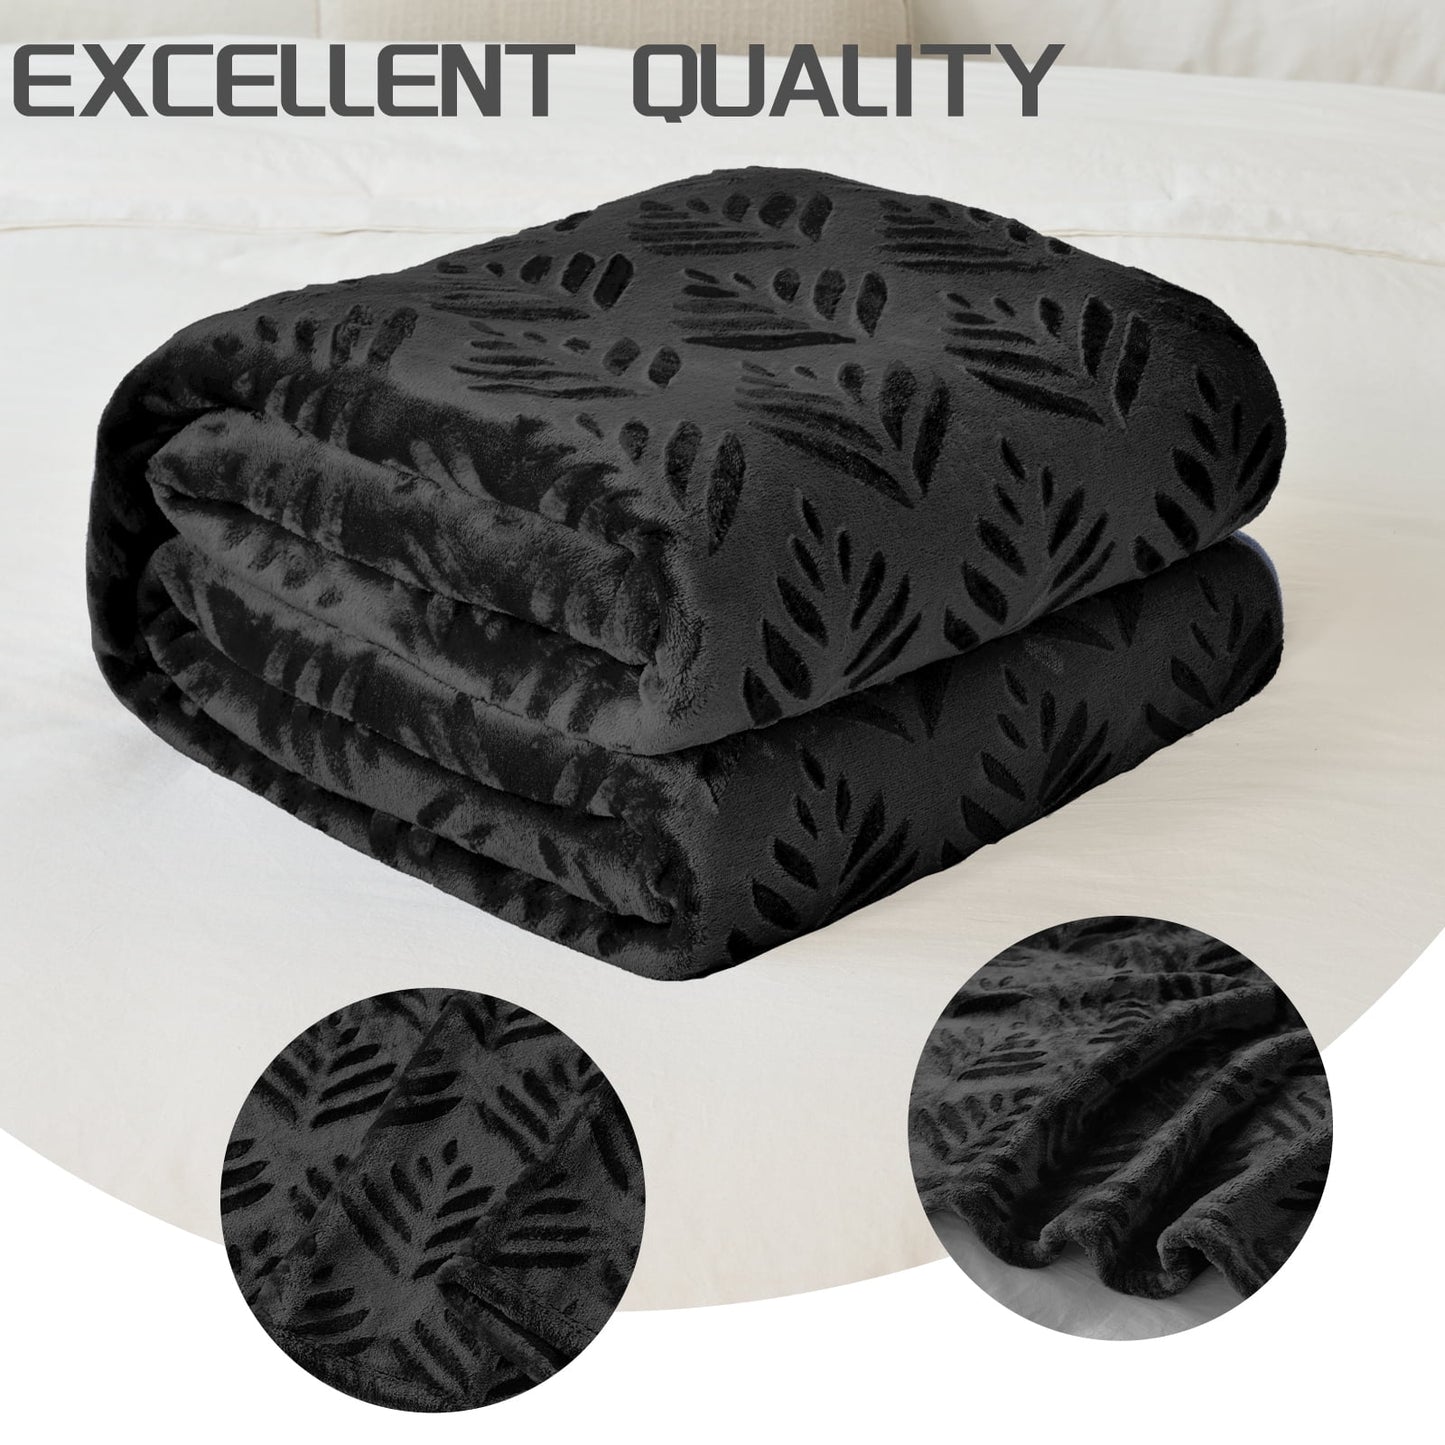 Exclusivo Mezcla Queen size Fleece Blanket for Bed, Super Soft and Warm Black Blankets for All Seasons, Plush Fuzzy and Thick Flannel Fleece Bed Blanket, 90x90 Inch